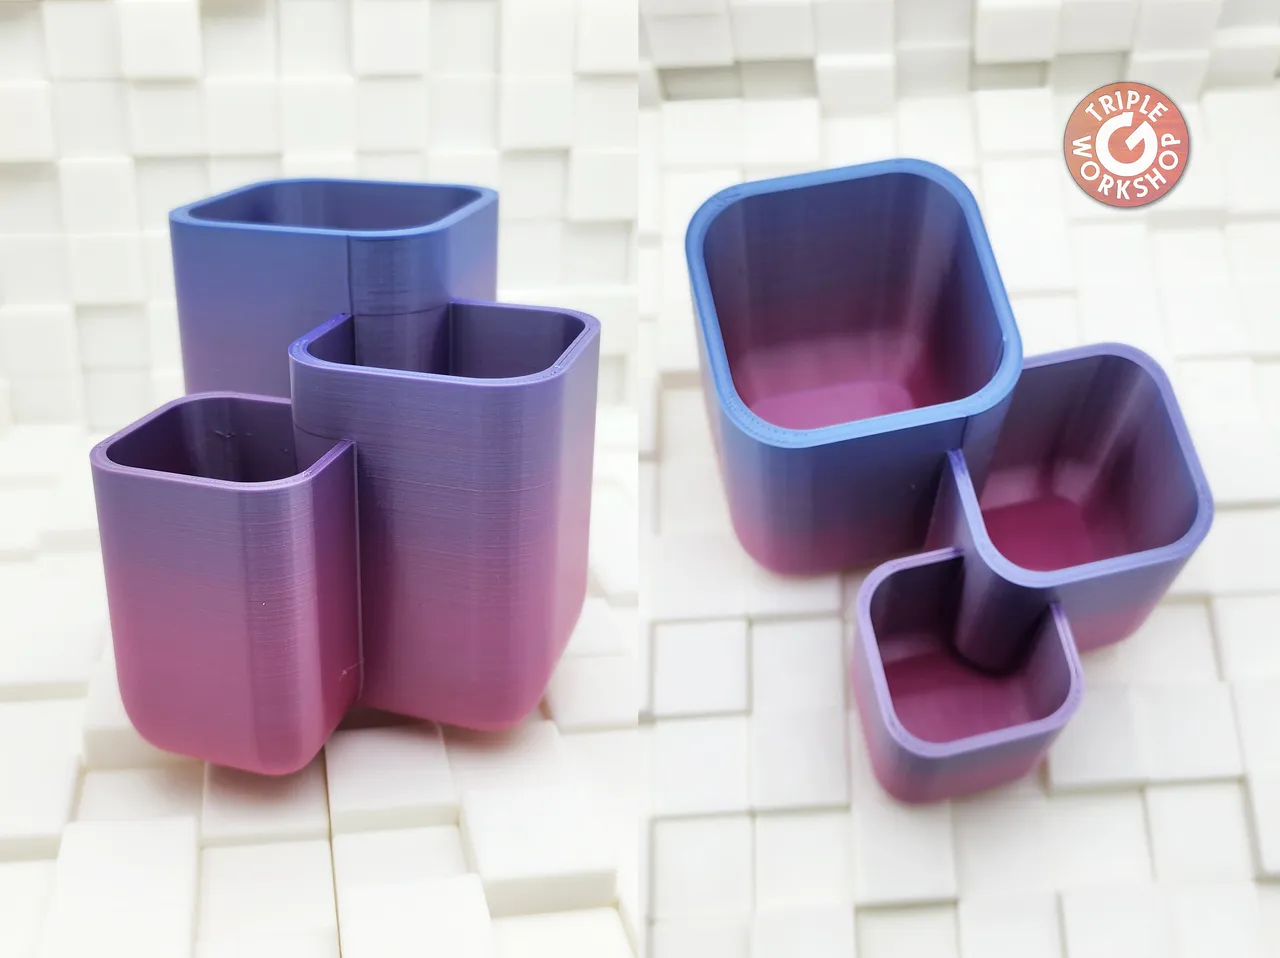 Overlapping Pen Cup 3d model